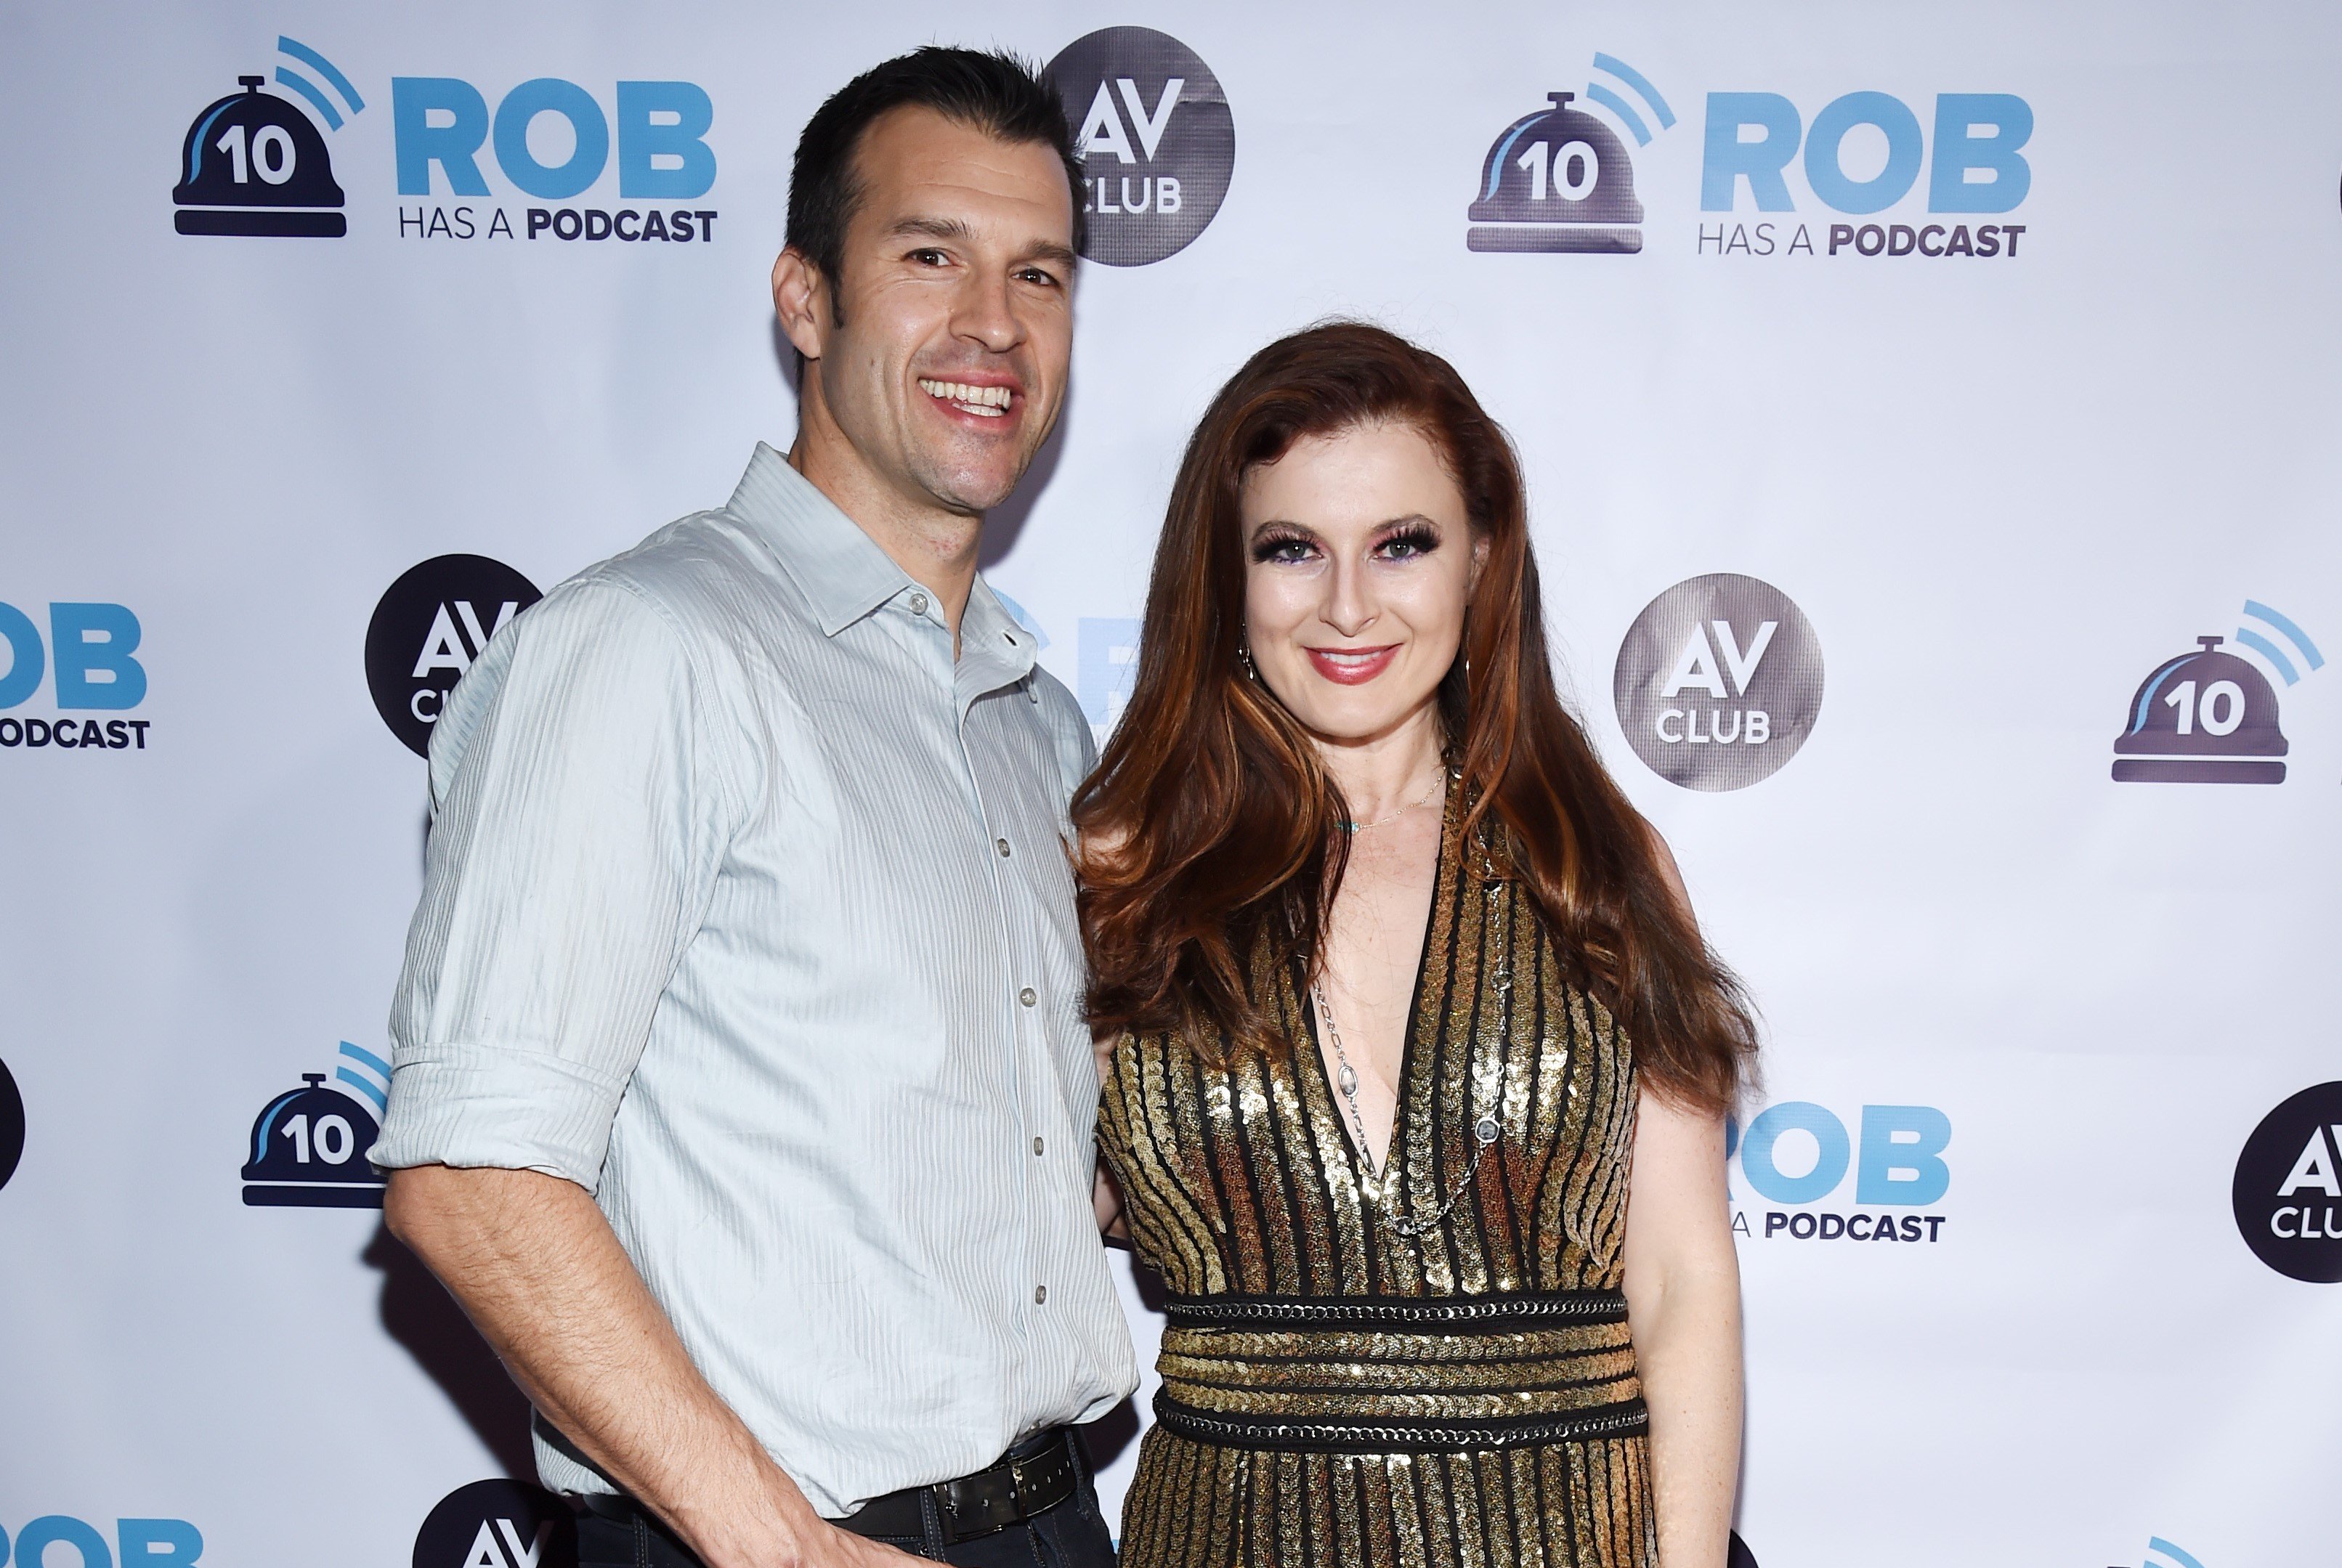 Brendon Villegas and Rachel Reilly, who met in 'Big Brother 12' on CBS, pose for pictures on the red carpet. Brendon wears